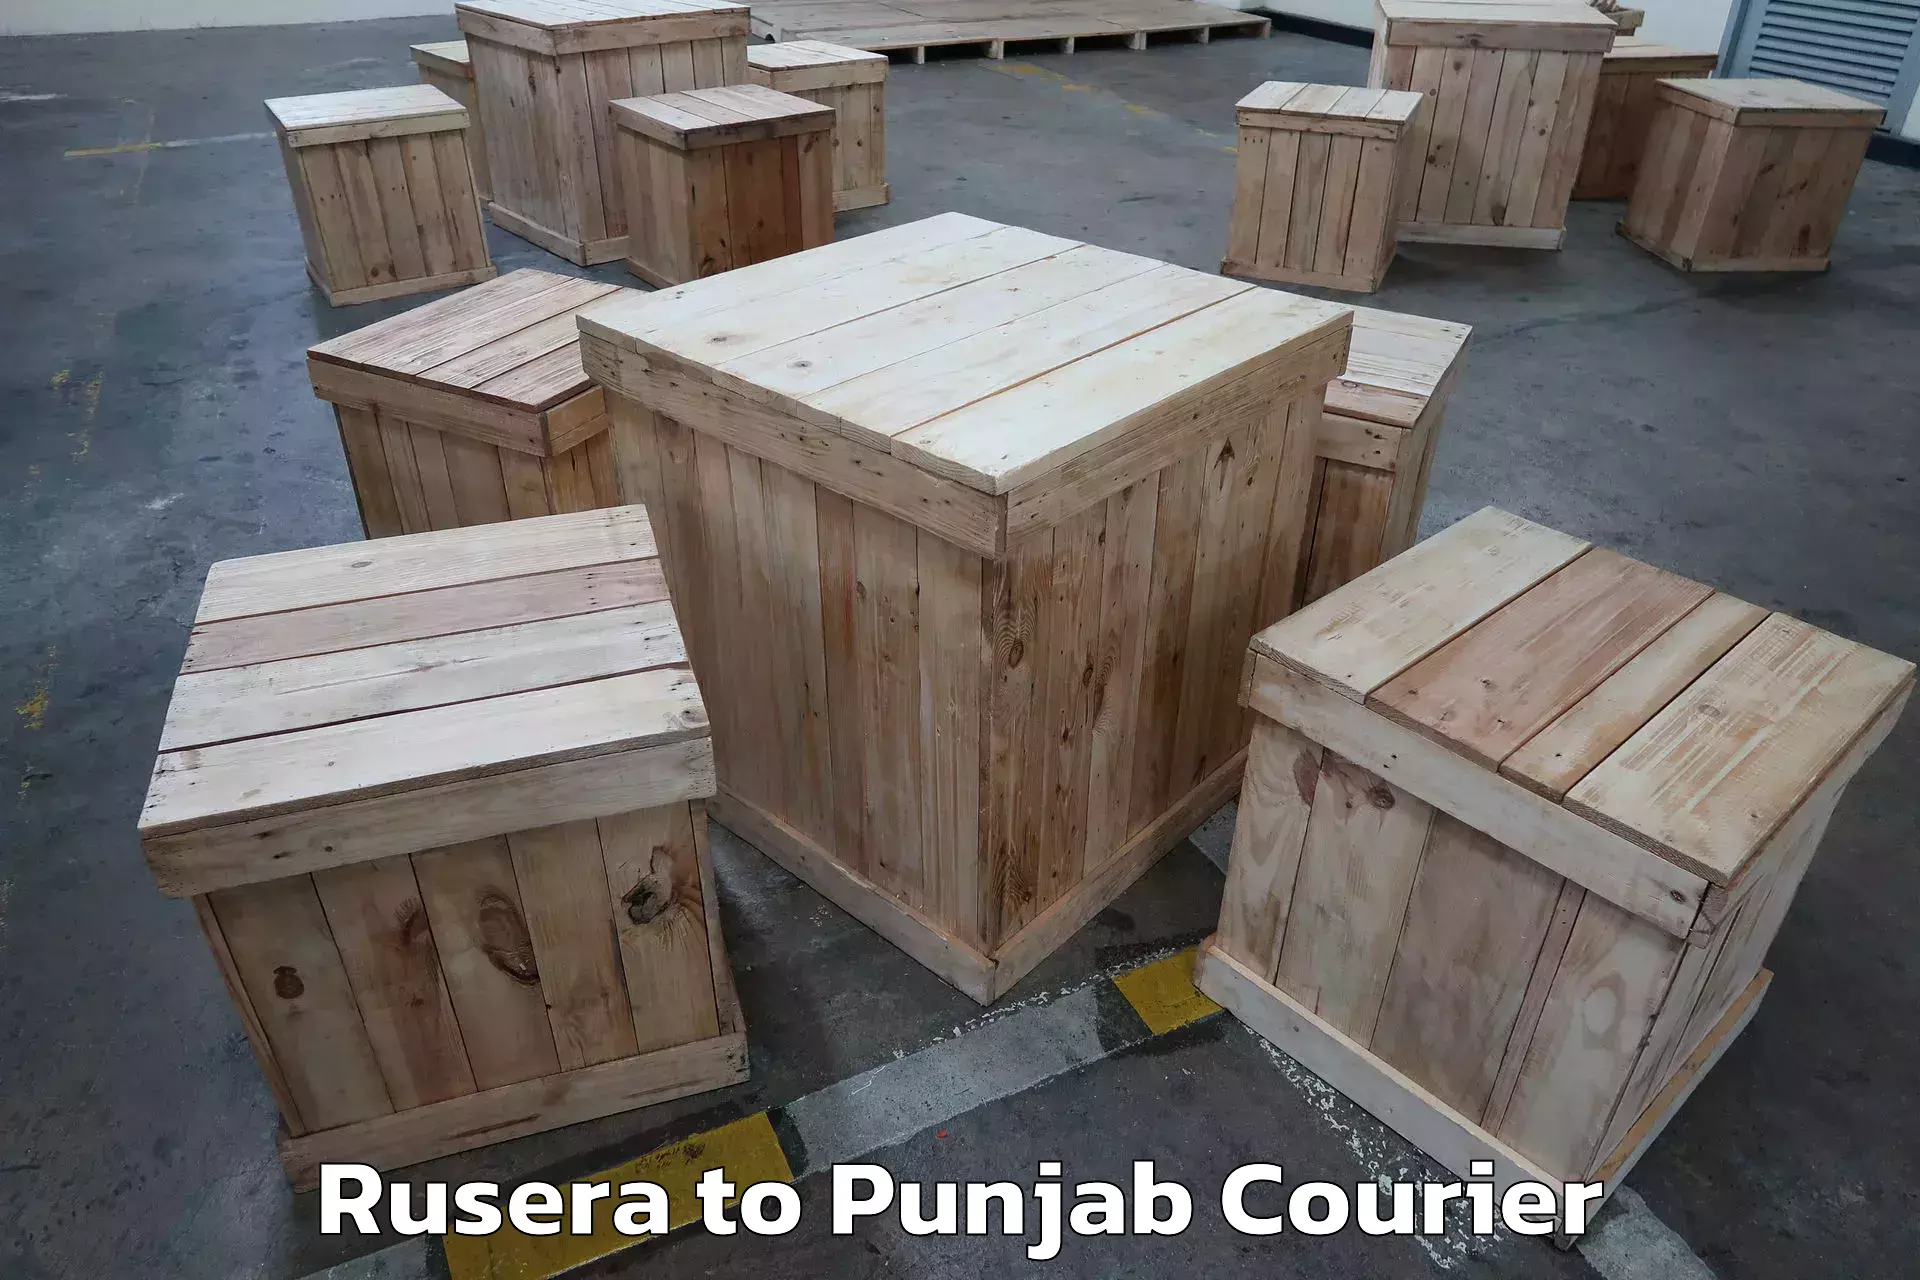 Trusted household movers Rusera to Punjab